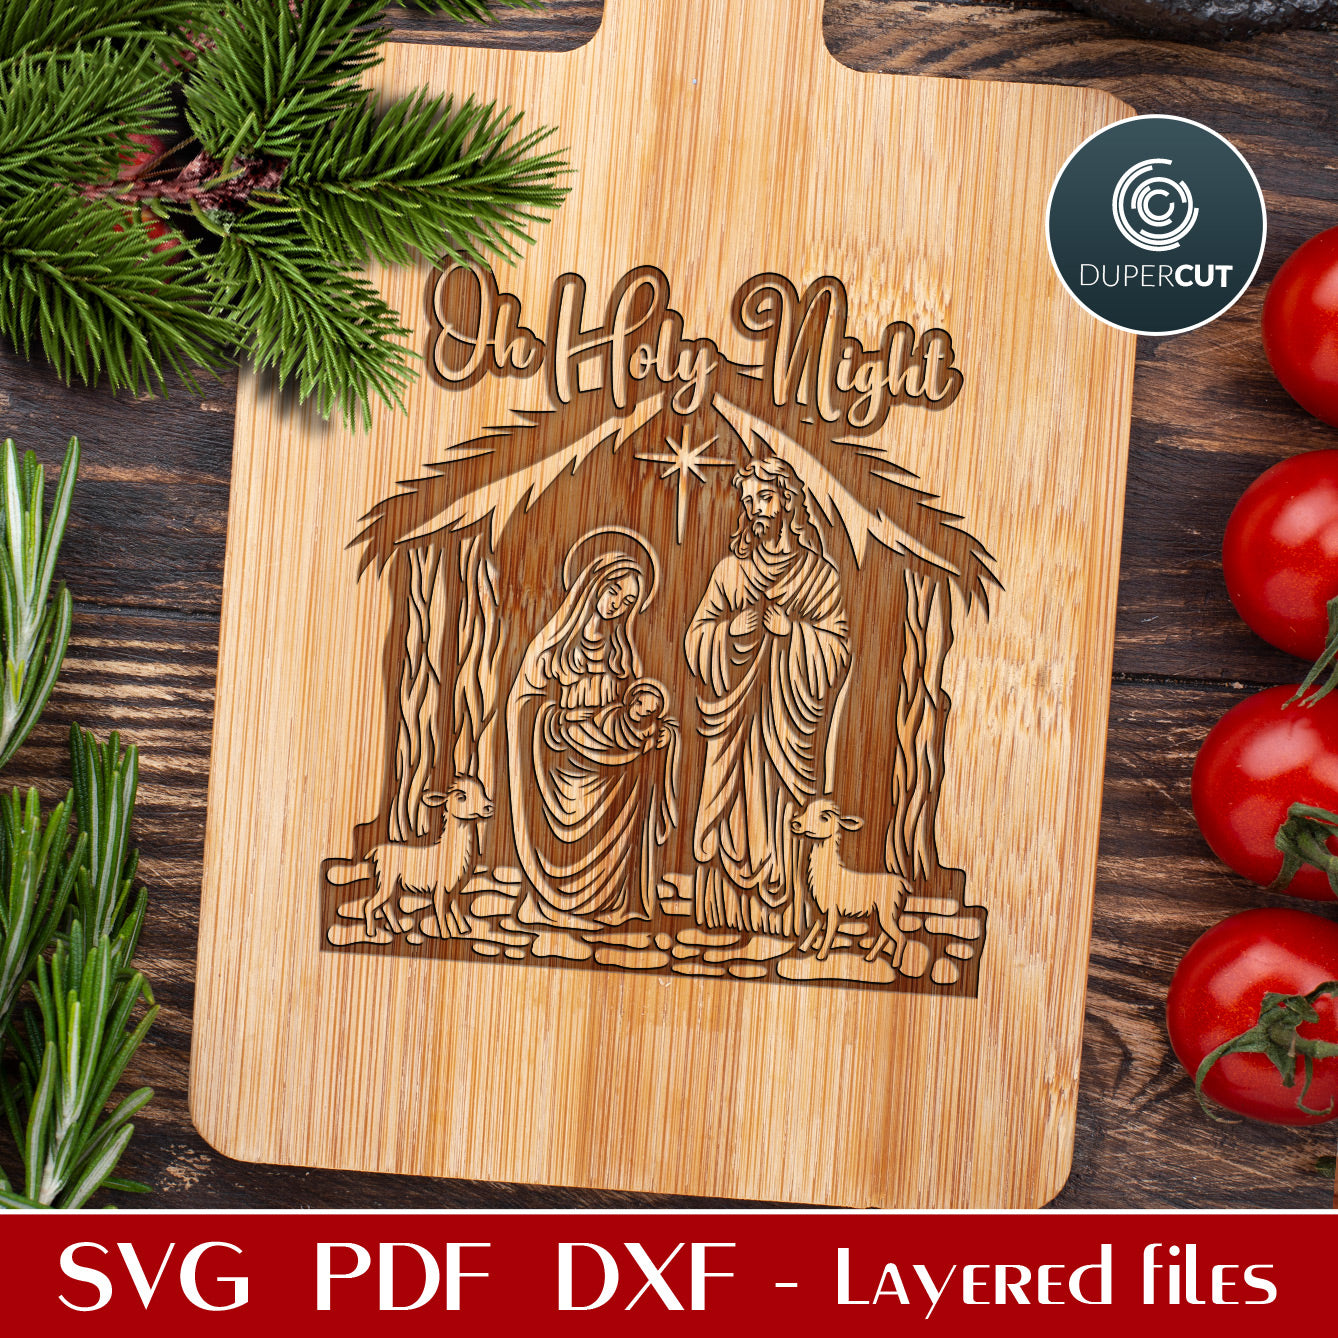 Christmas Nativity scene Oh Holy Night - SVG vector layered files for laser cutting and engraving, sublimation, Glowforge, Cricut, CNC plasma machines by www.dupercut.com